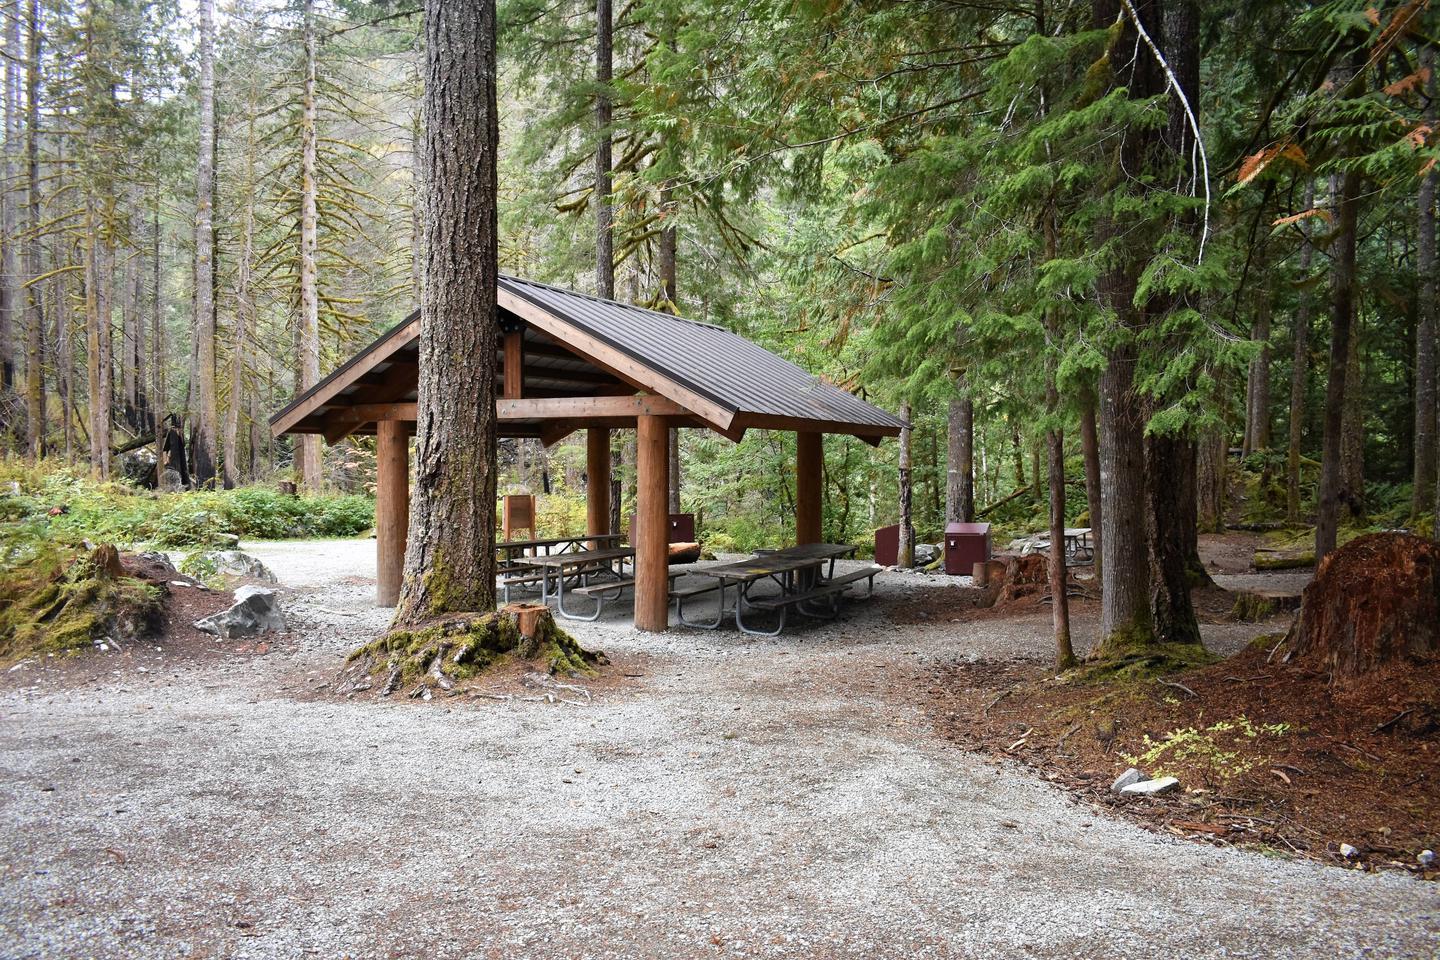 A forested campsite with picnic tables under a pavillion.